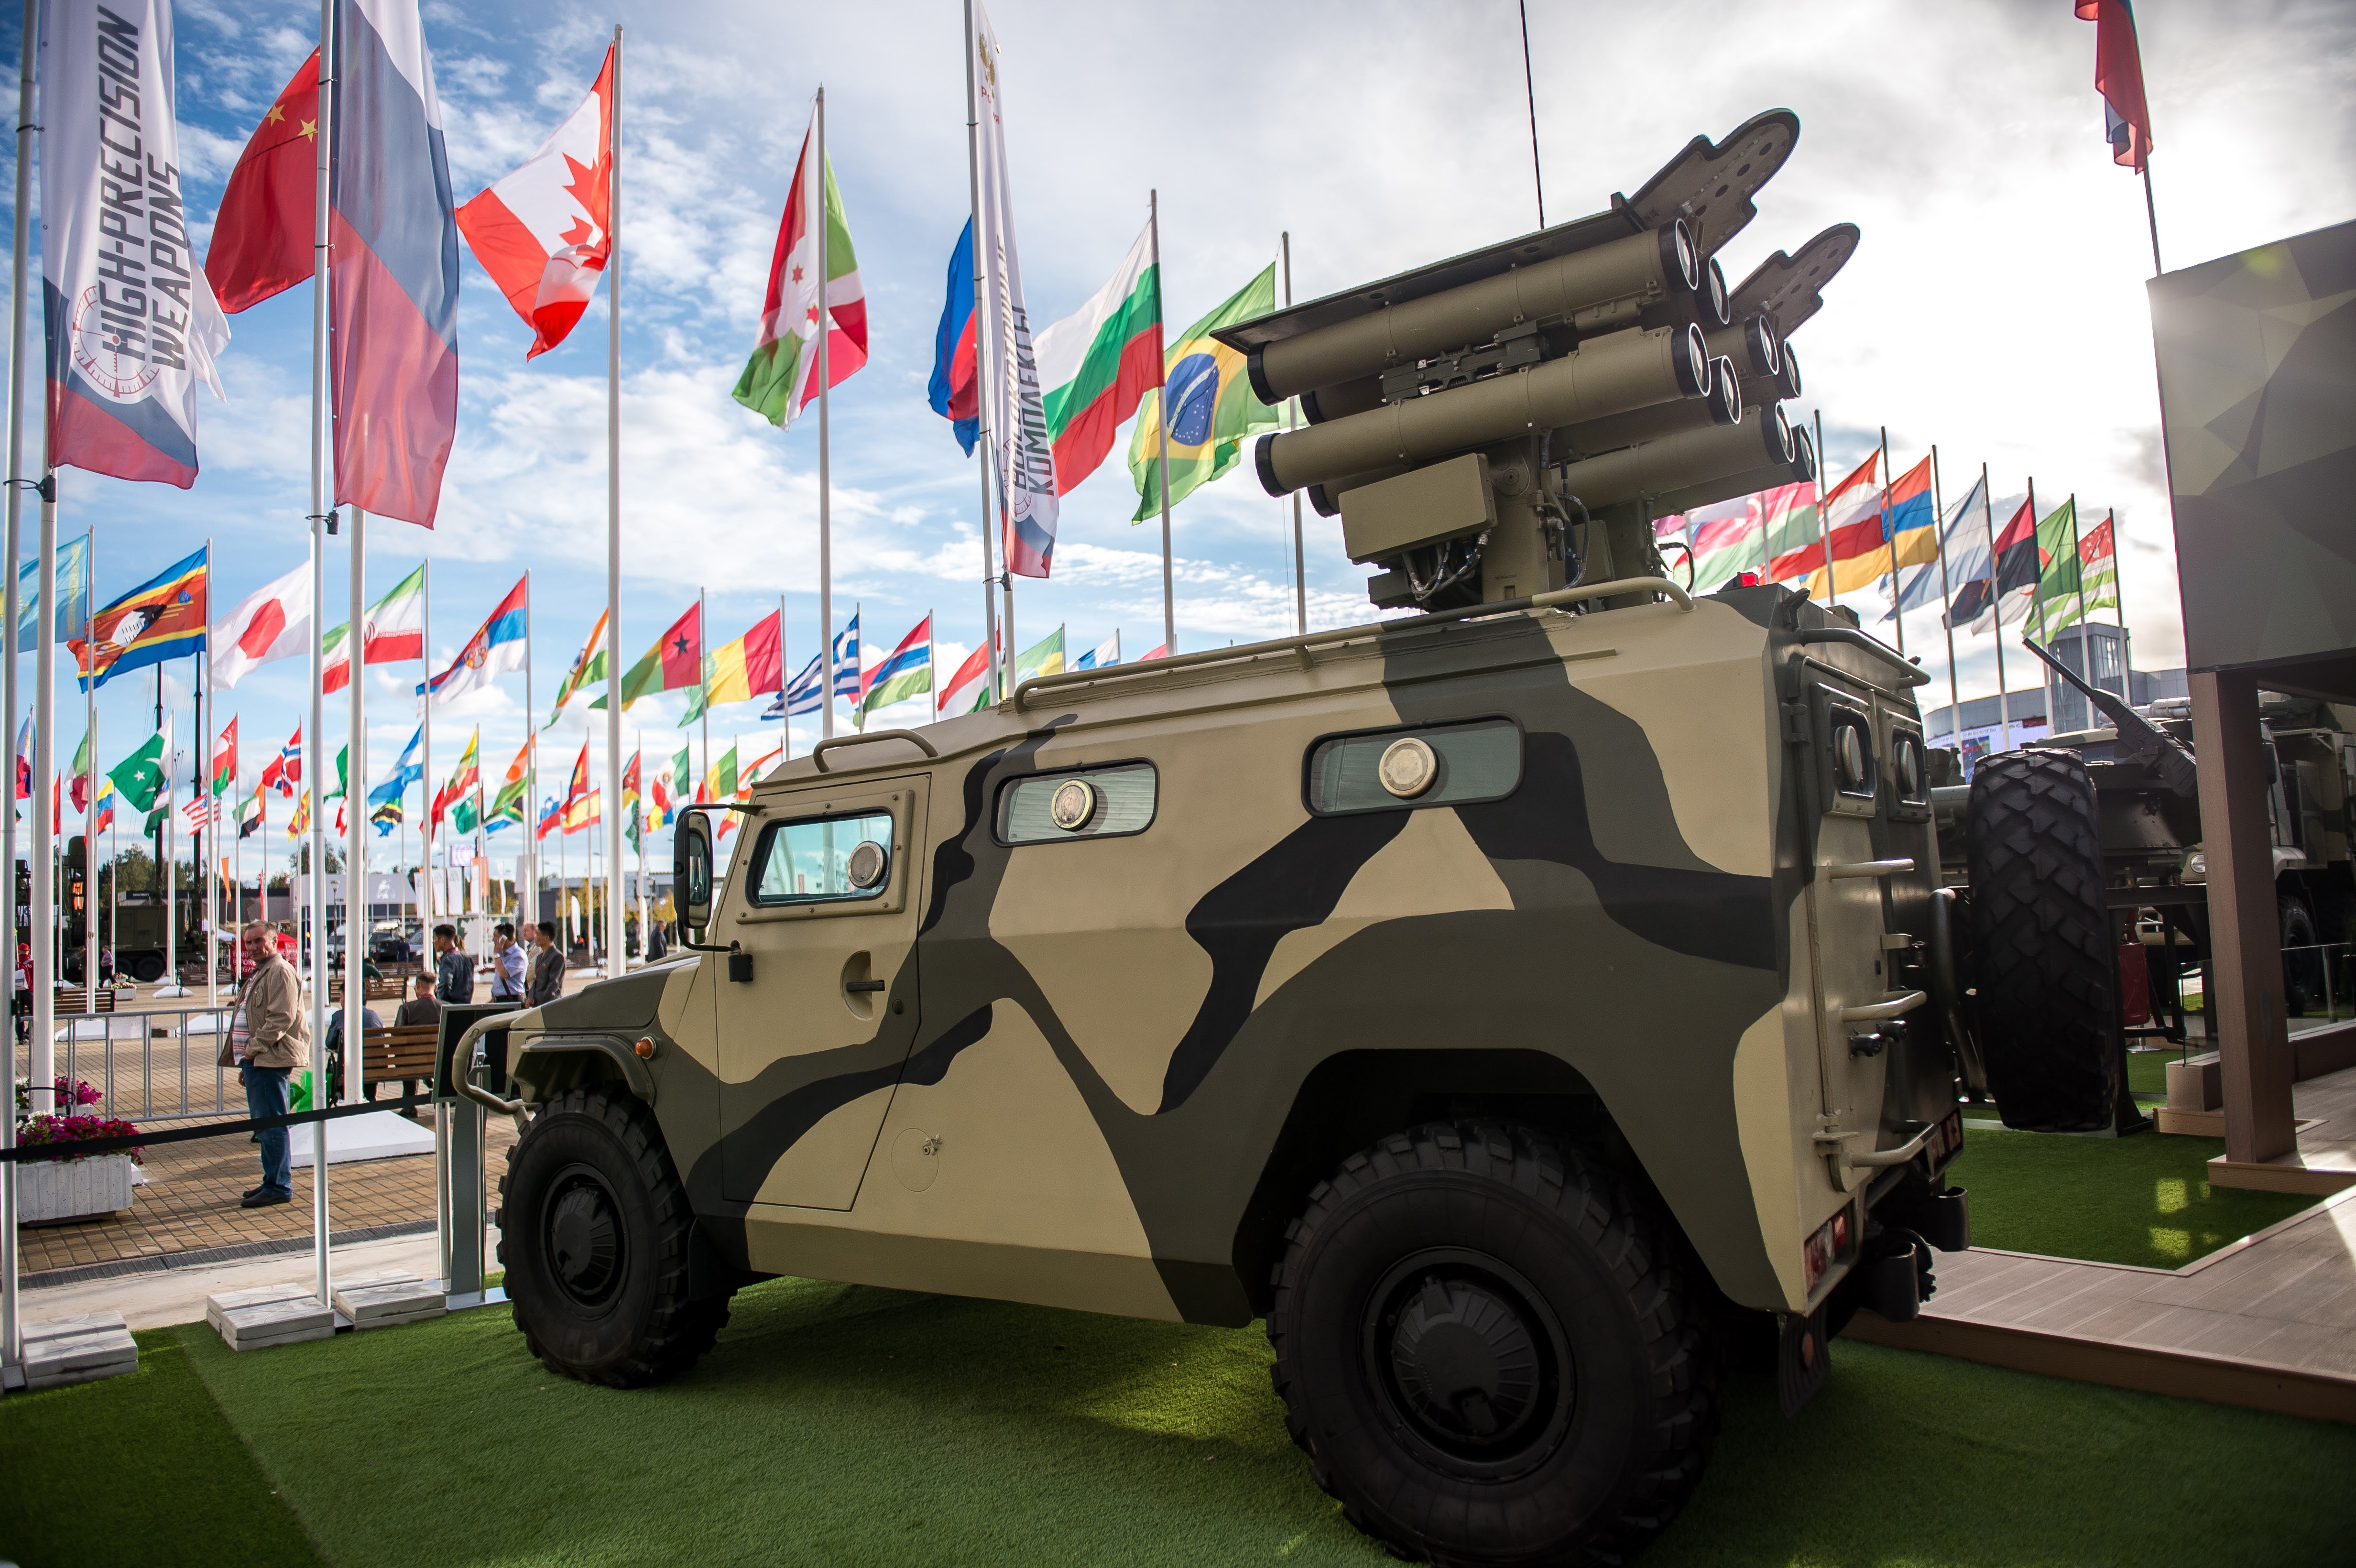 Rosoboronexport to Demonstrate Modern Army and Navy Equipment at Defexpo India-2018